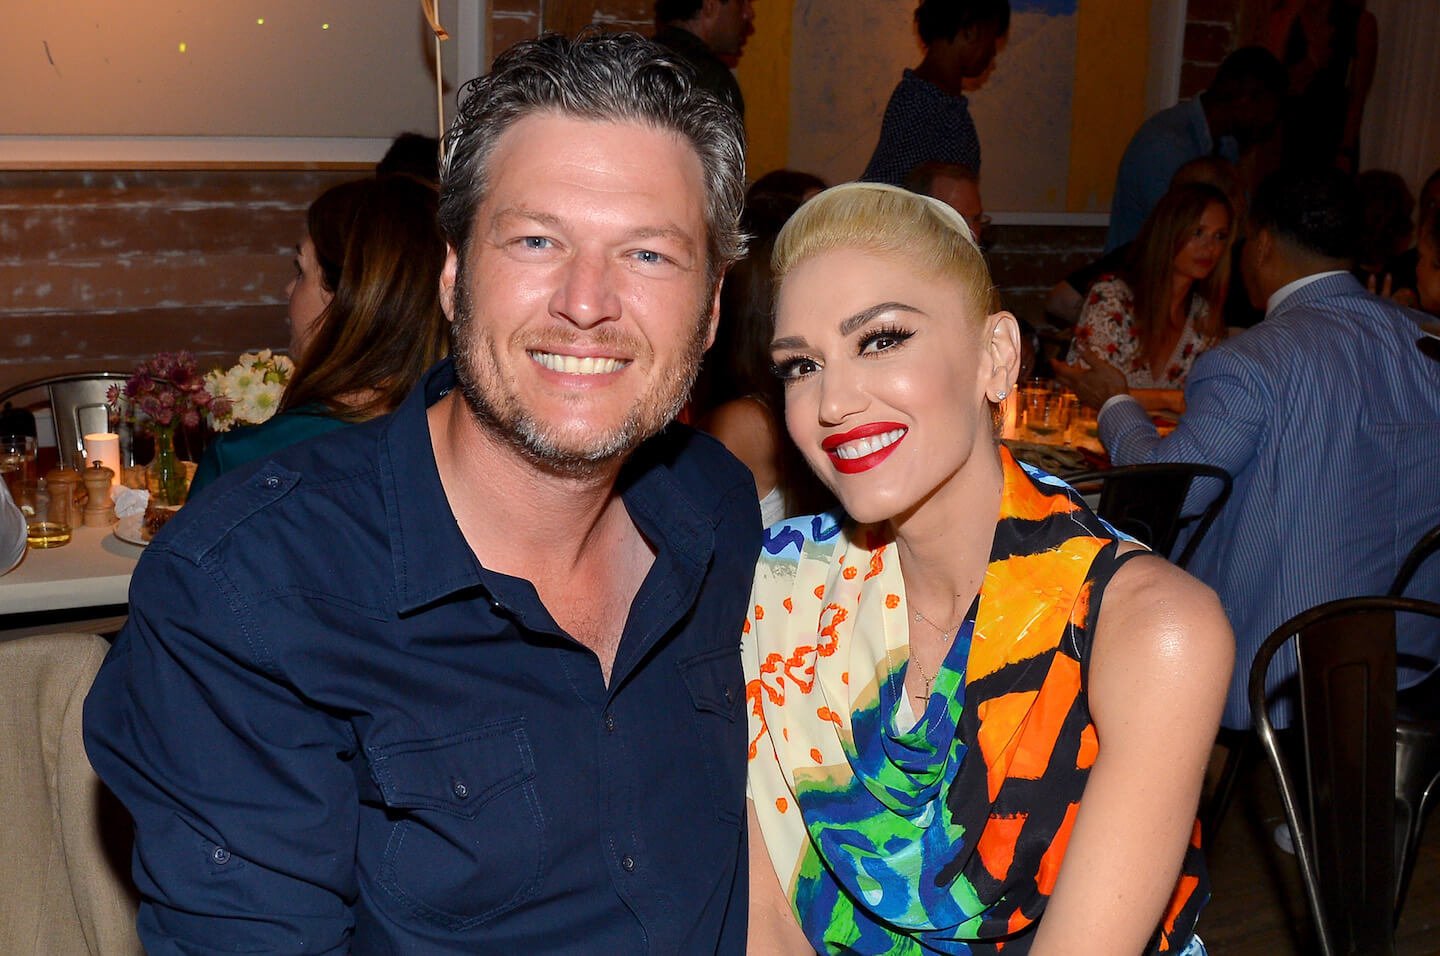 'The Voice' coaches Blake Shelton and Gwen Stefani leaning into each other and smiling